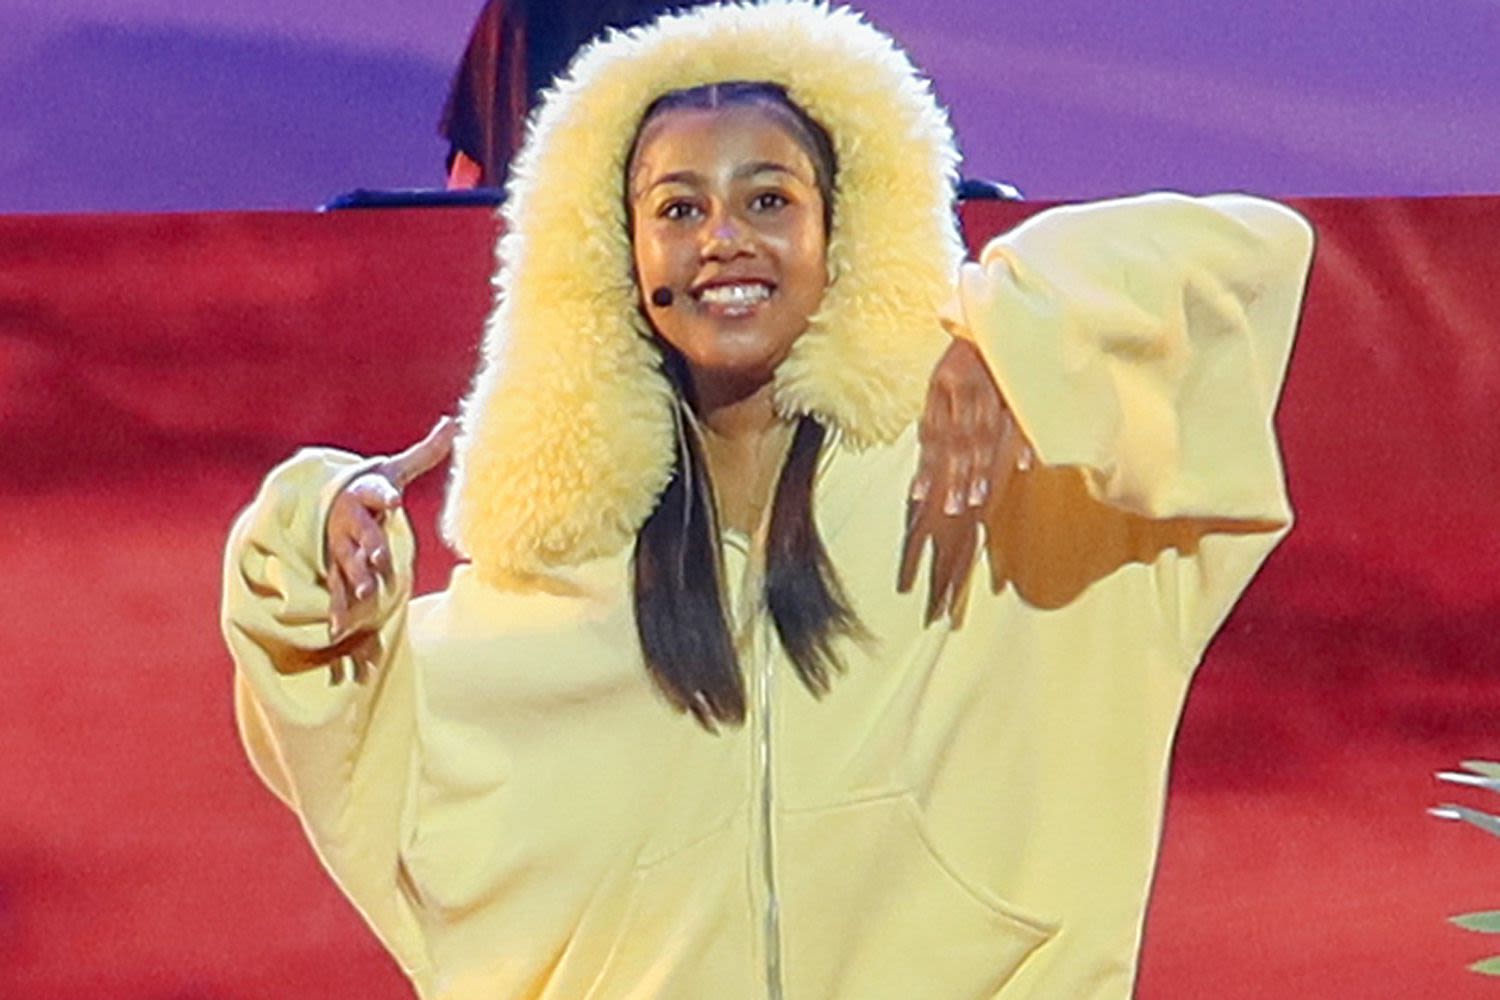 North West Wore Her Own Simba Costume for “The Lion King” Live Show — Complete with Furry Slippers